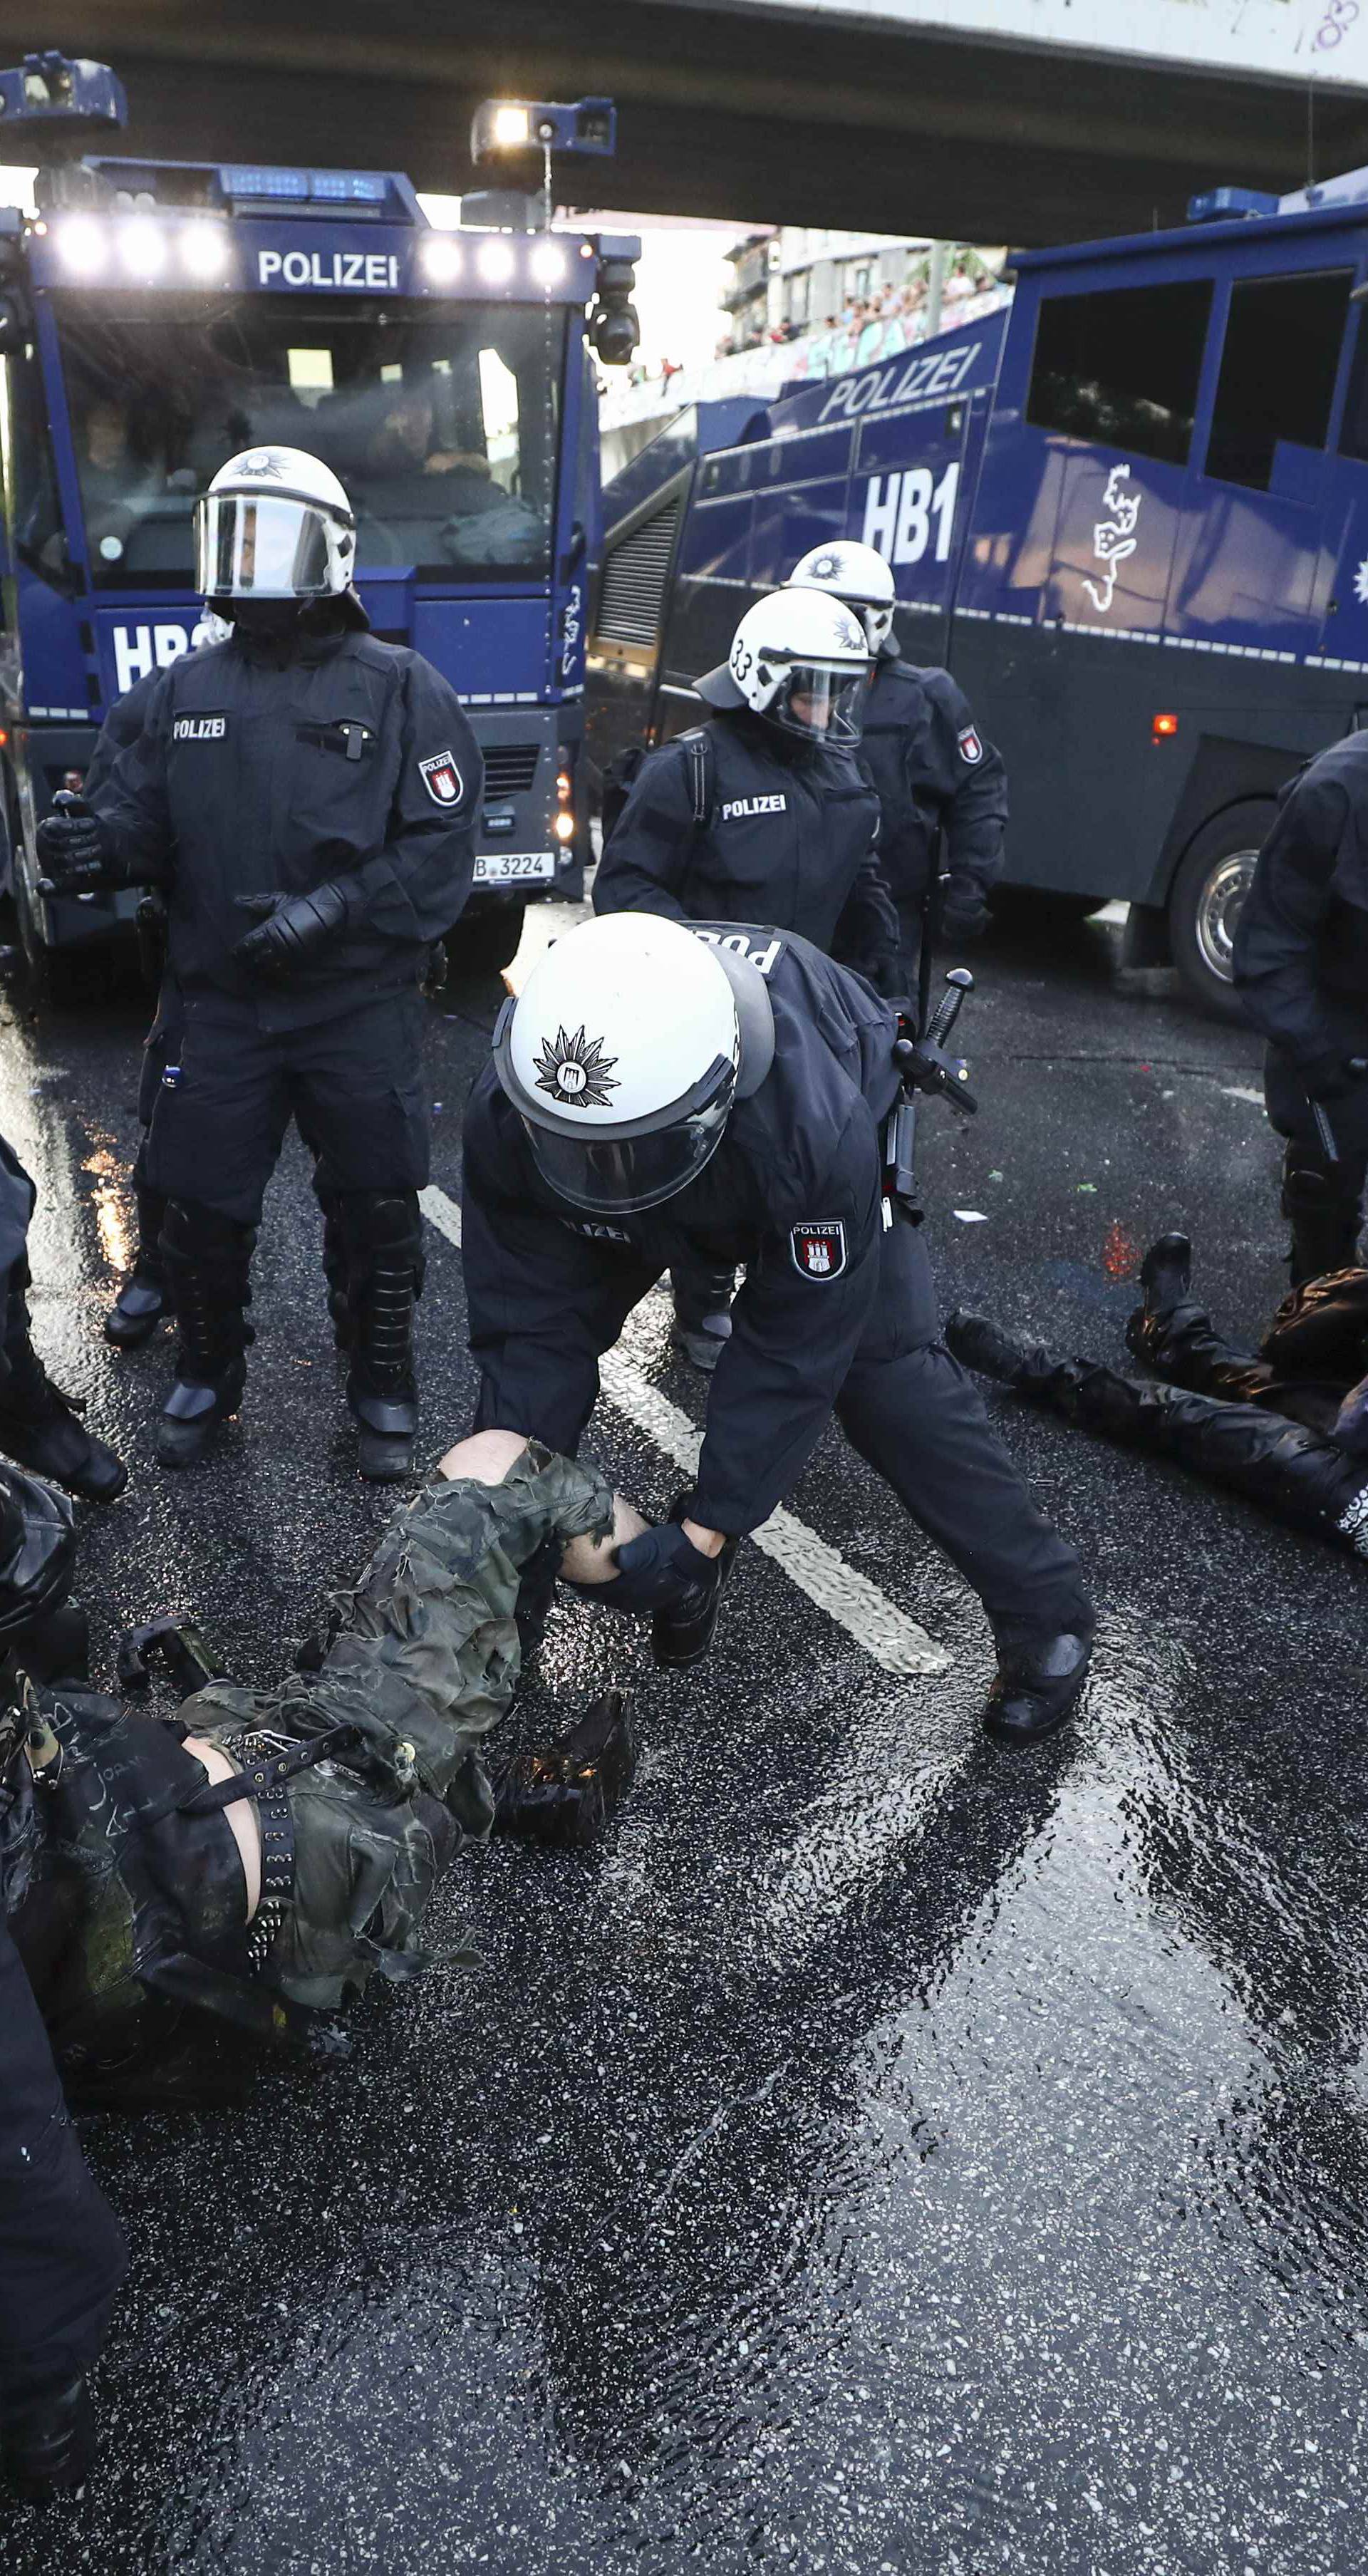 German riot police detain protesters during the demonstrations during the G20 summit in Hamburg